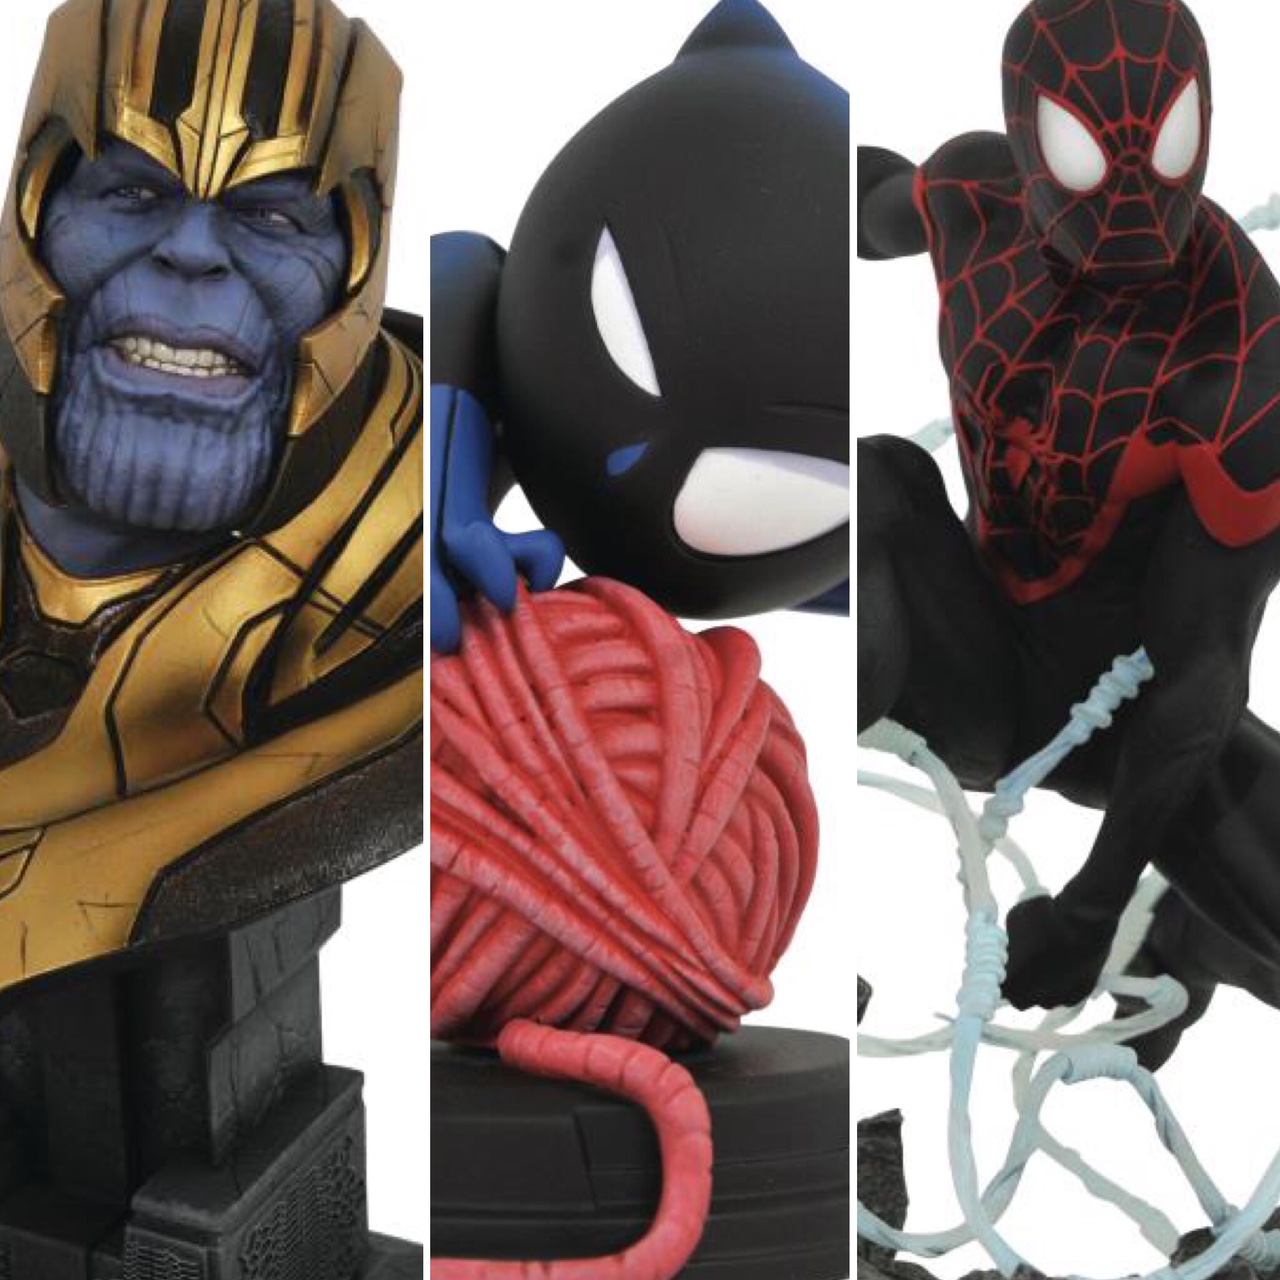 DST Thanos Bust! Miles Morales Statue! Animated Black Panther 